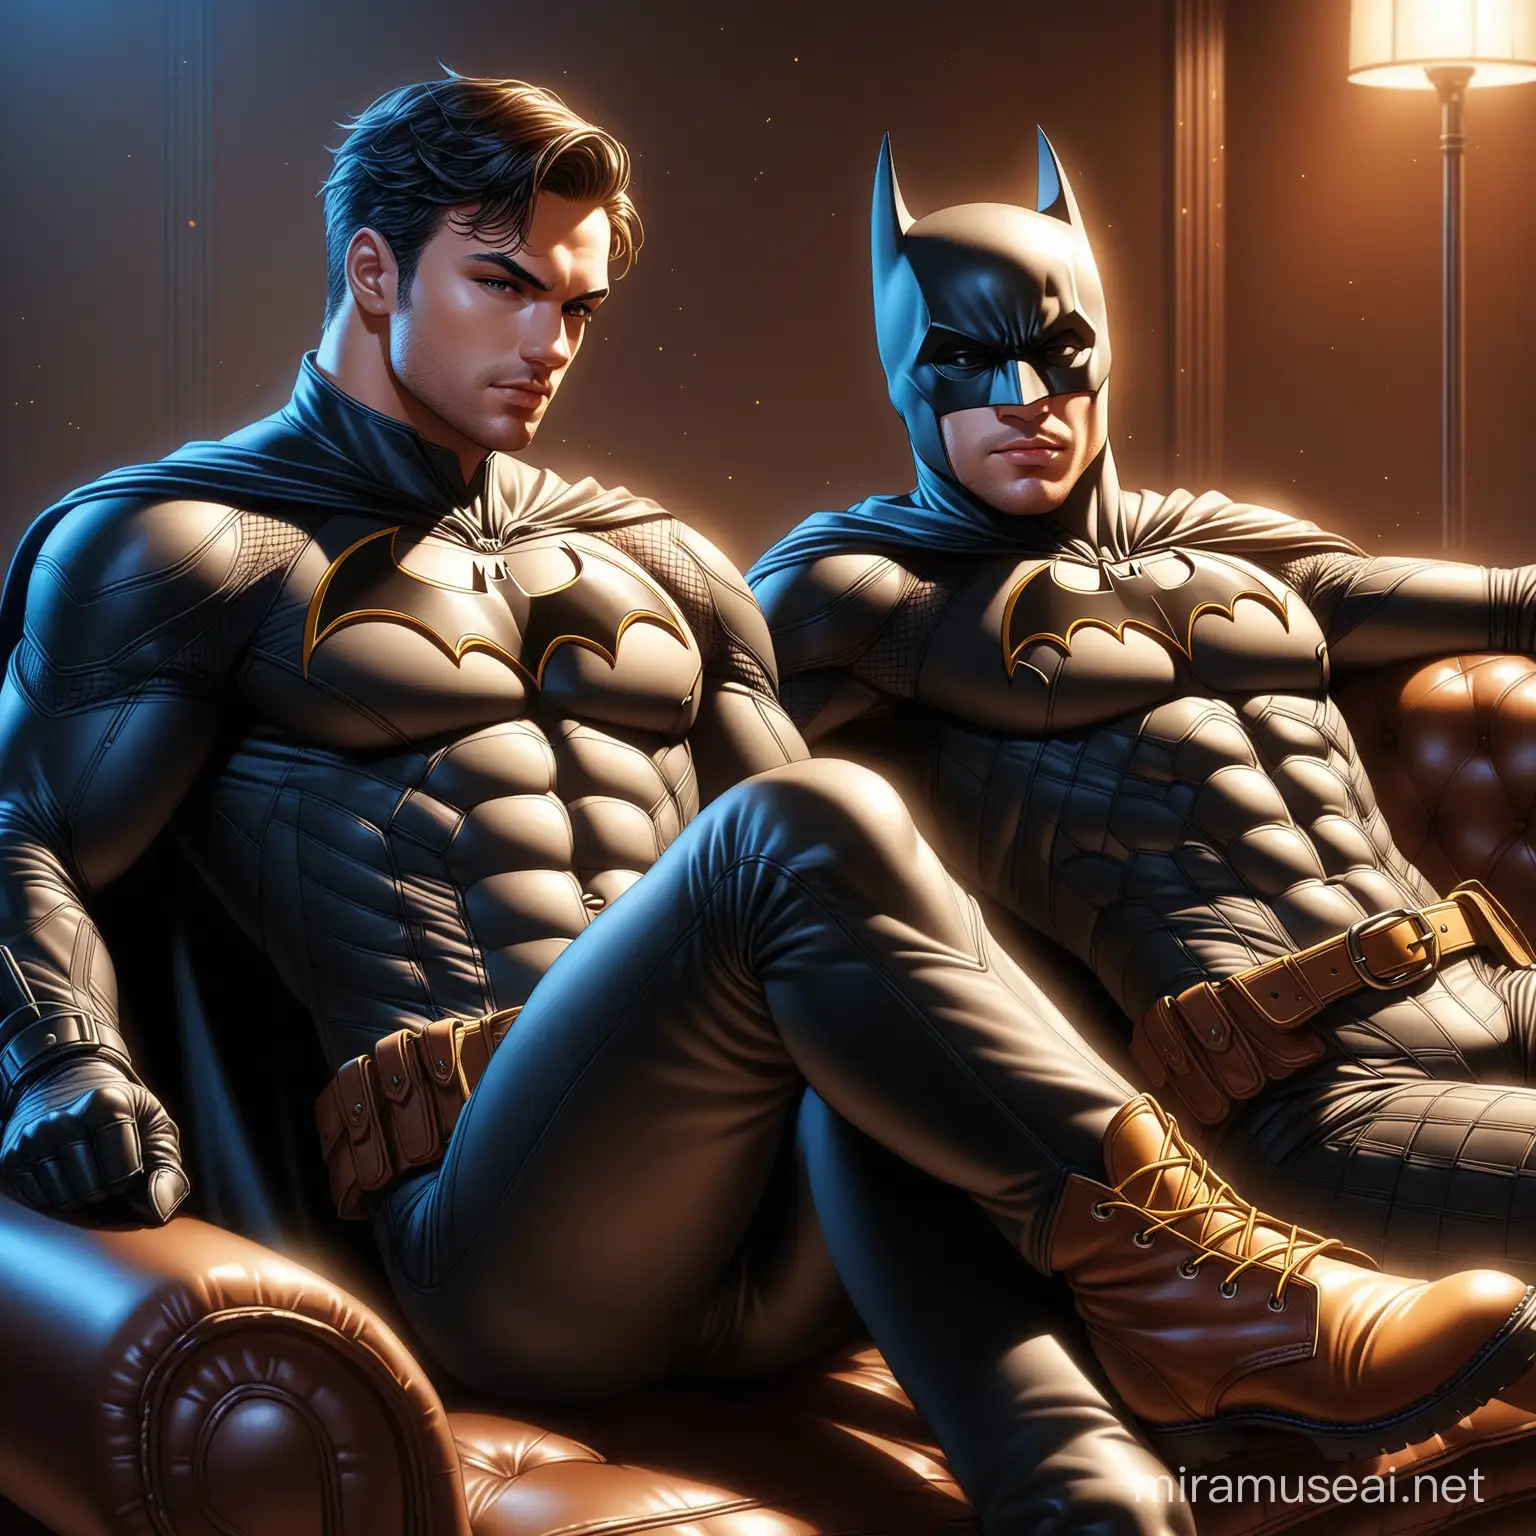 Hyperrealistic Depiction of Batman and Robin Relaxing in Leather Boots